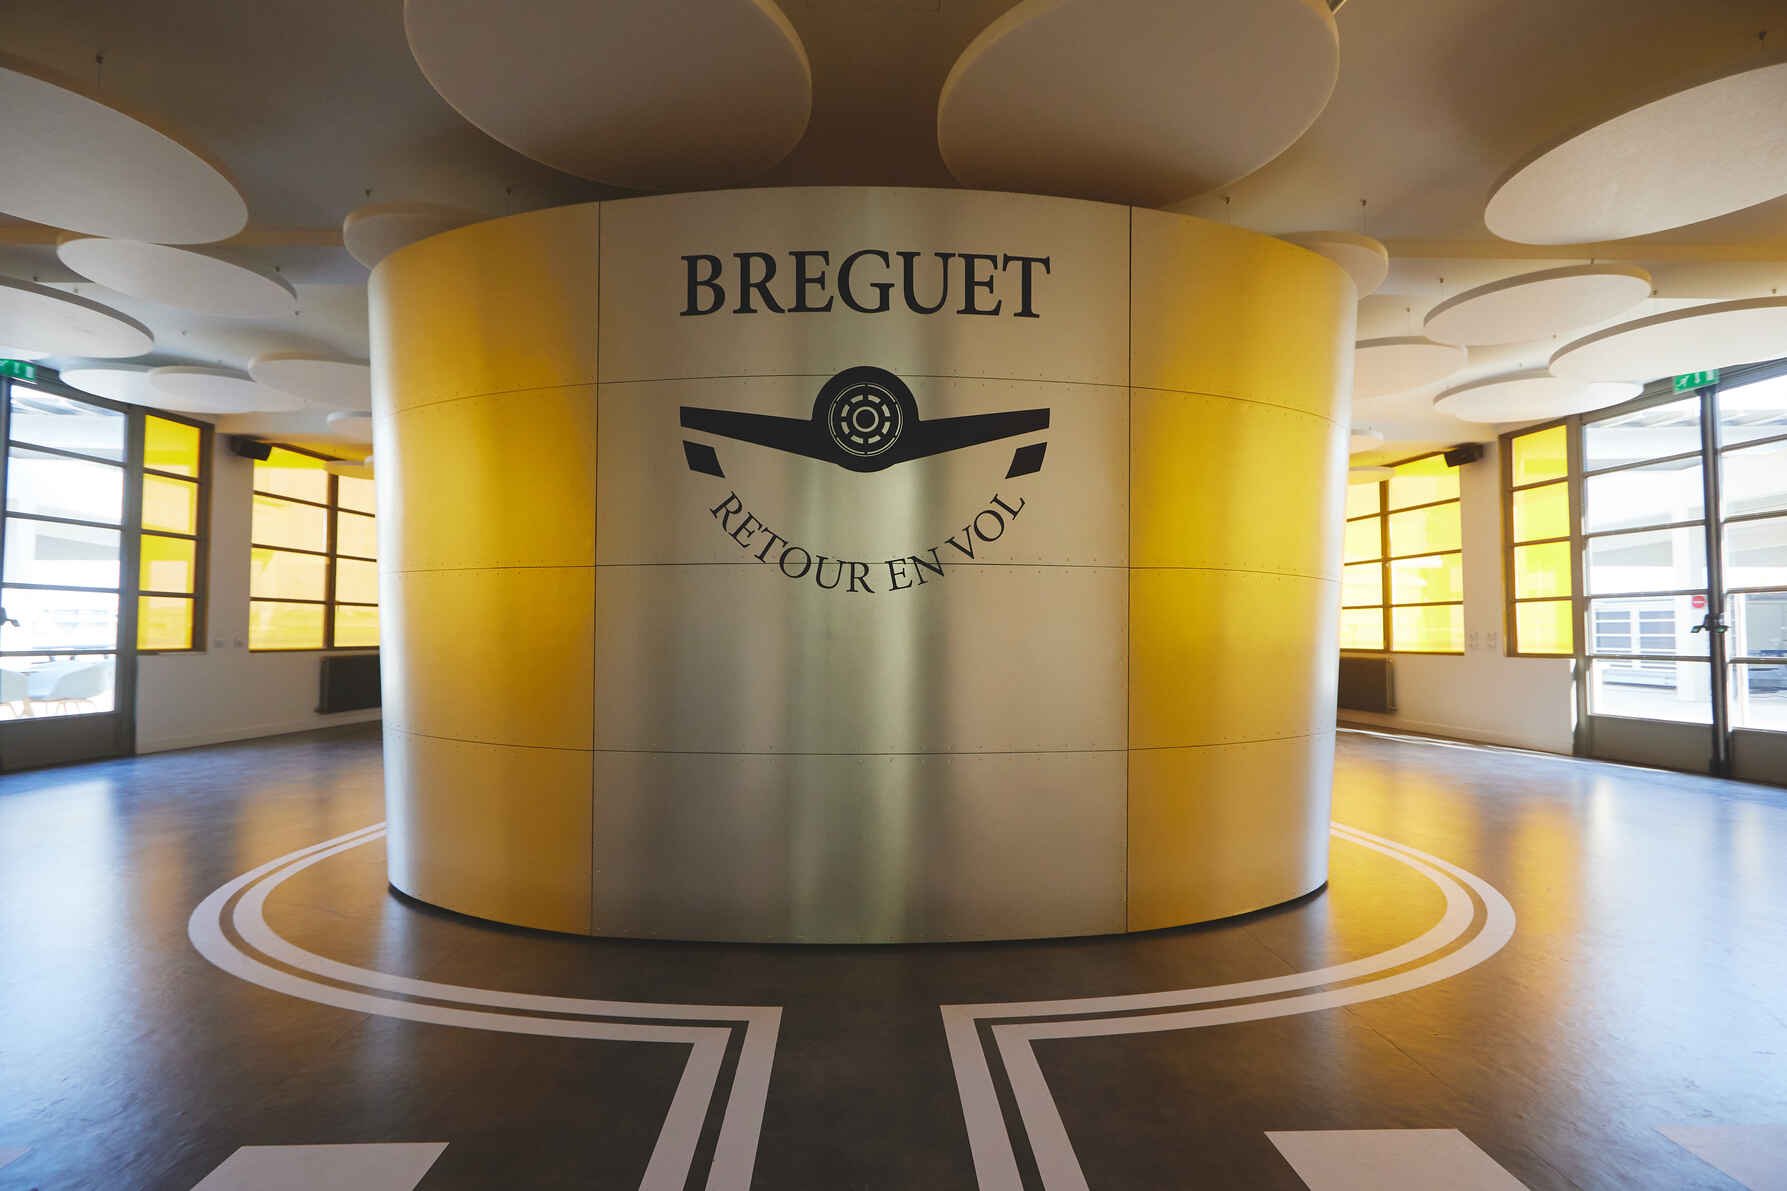 “Breguet holds a special place in people's hearts”